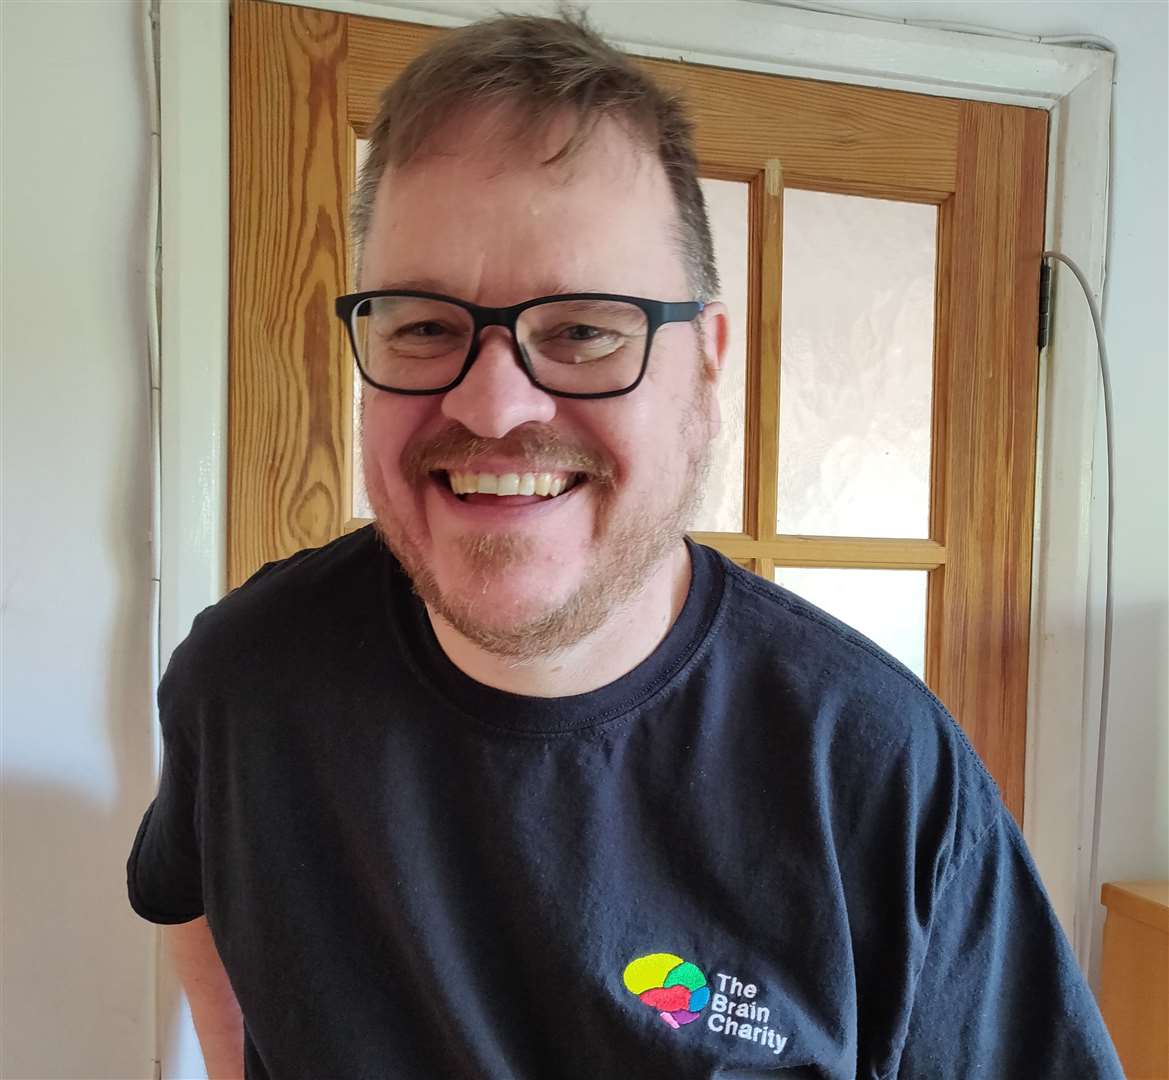 Paul Ives, 54, from Medway, suffered a ruptured brain aneurysm in January 2020 Pic: The Brain Charity